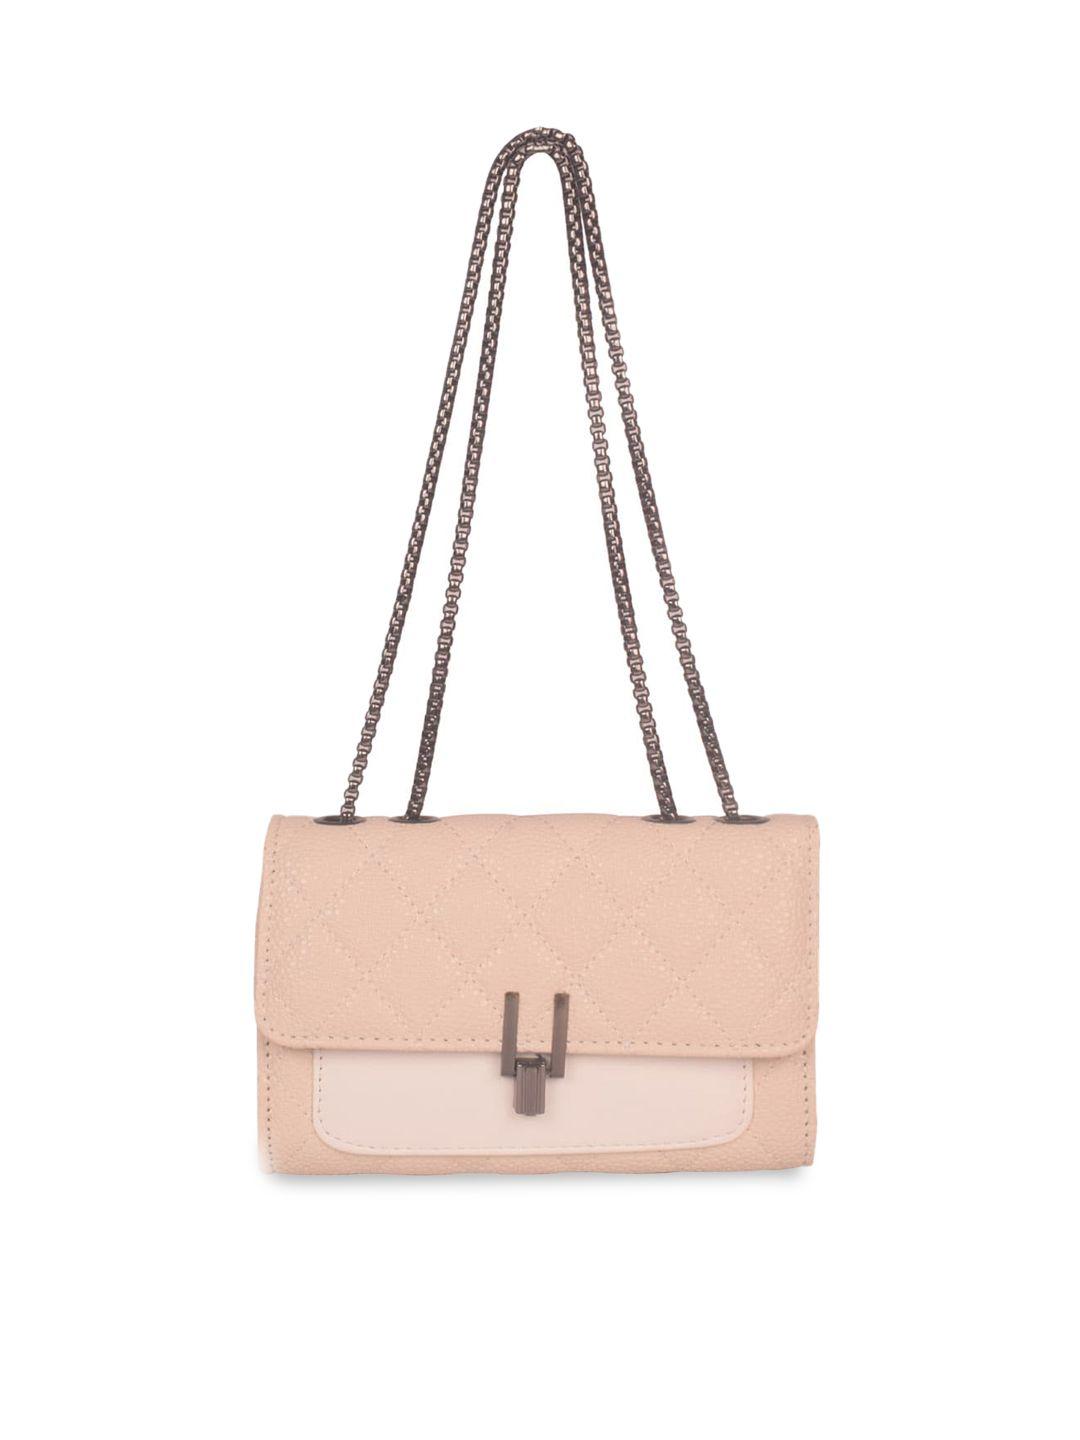 bagkok beige pu structured sling bag with bow detail